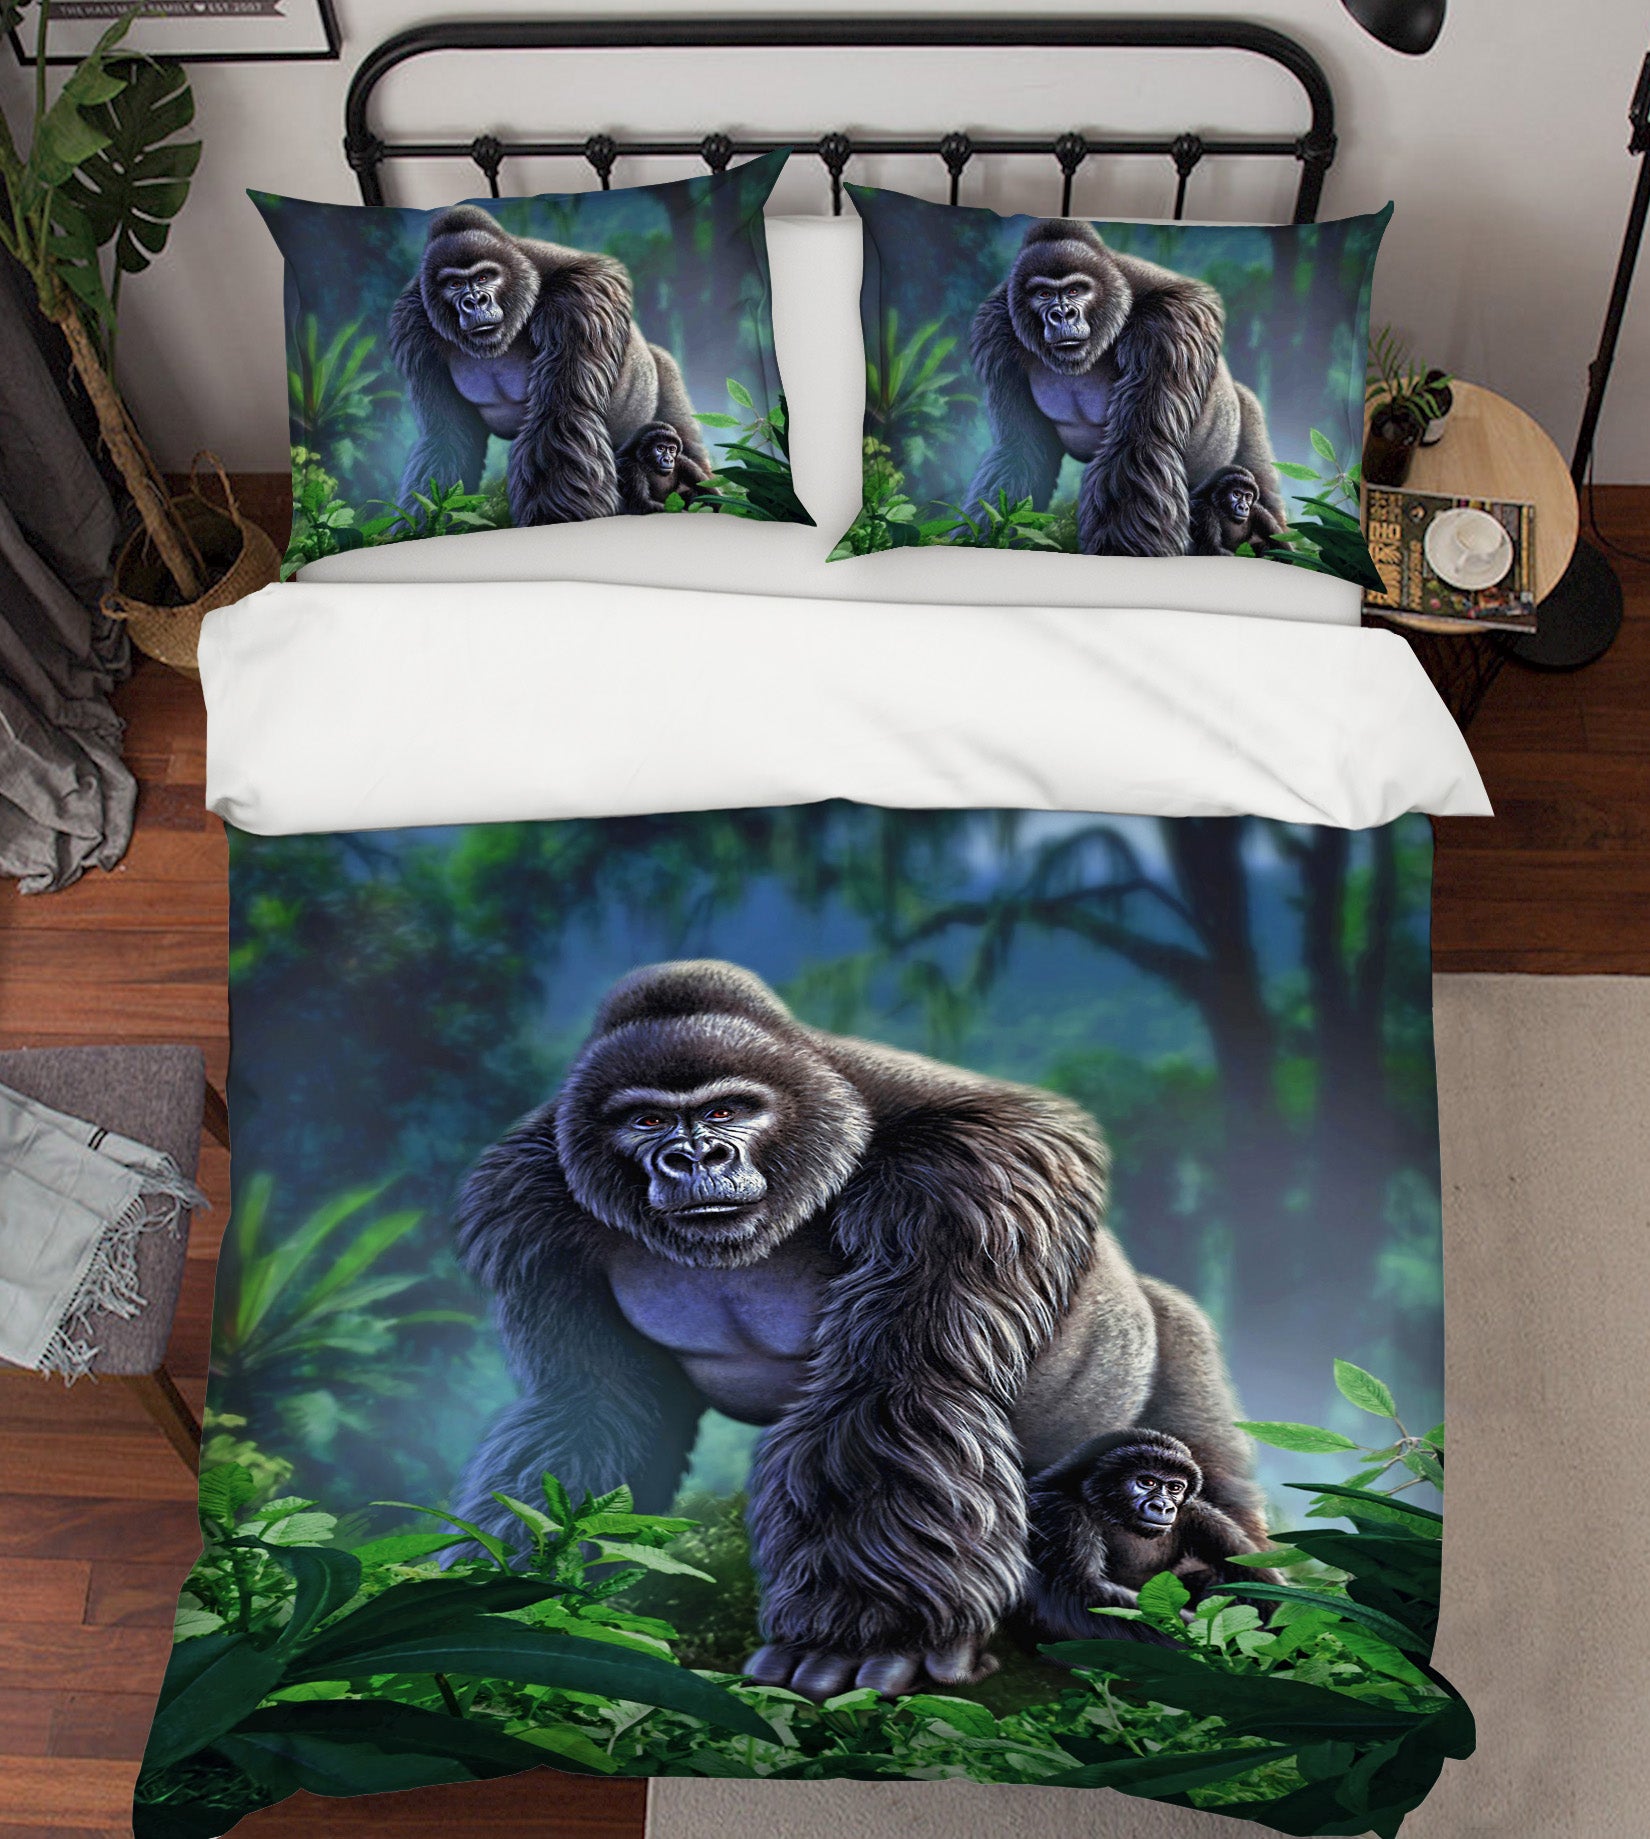 3D Guardian 2124 Jerry LoFaro bedding Bed Pillowcases Quilt